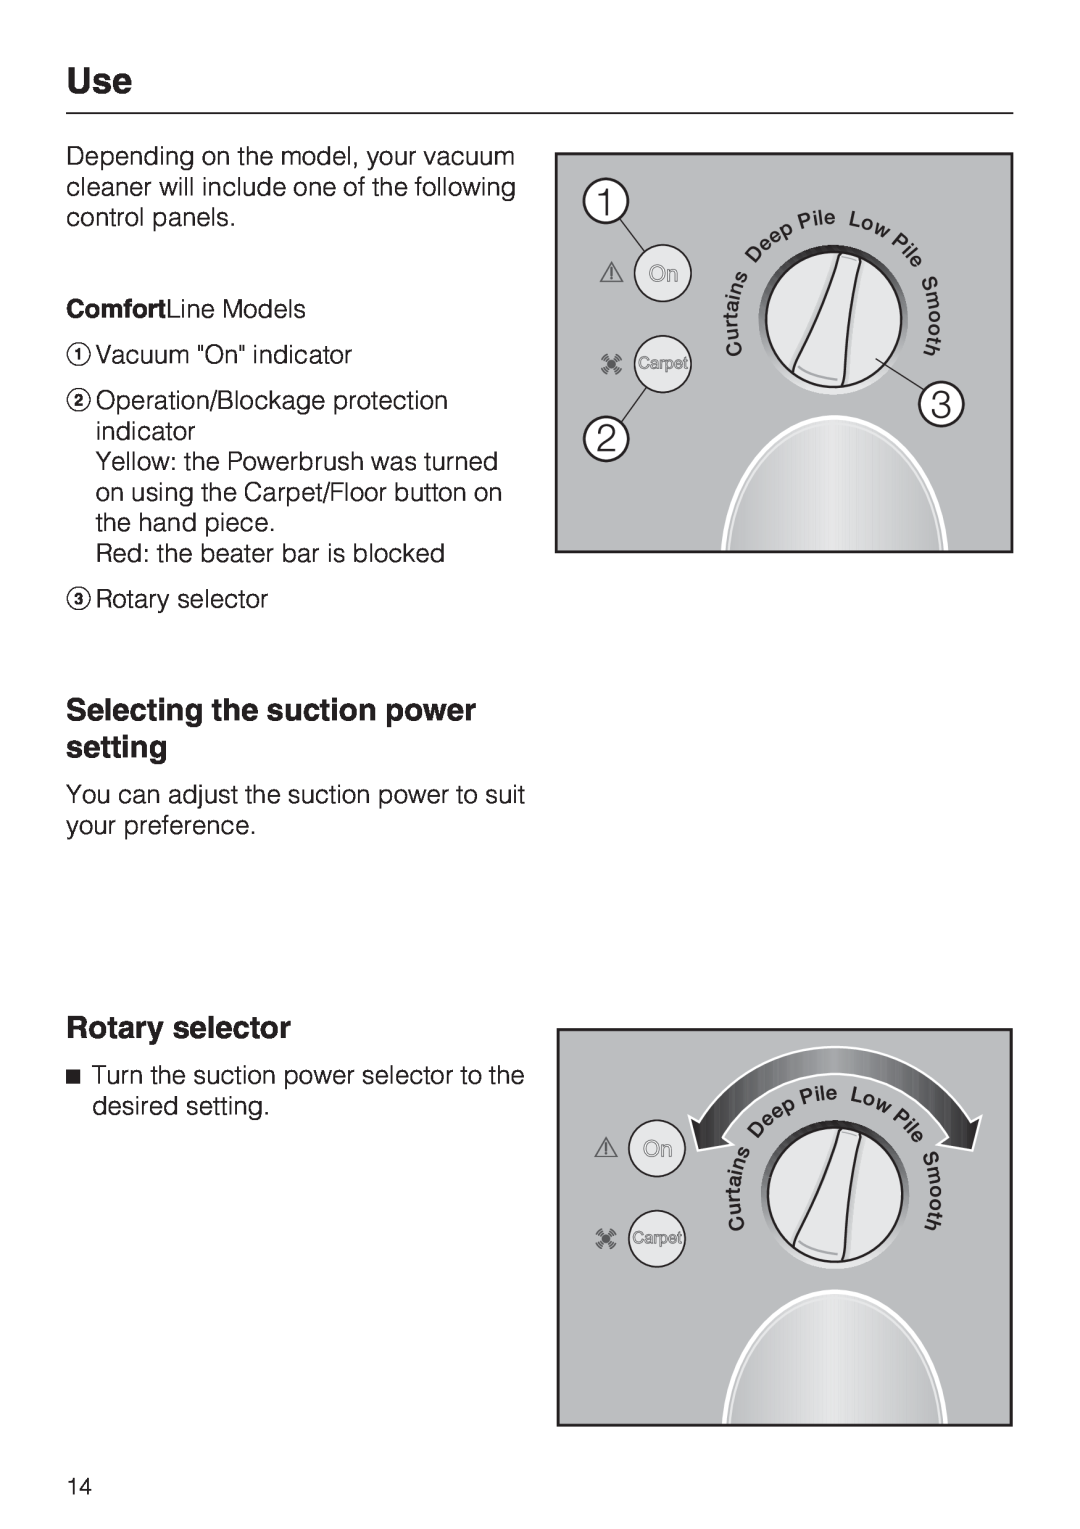 Miele S 7000 operating instructions Selecting the suction power setting, Rotary selector 